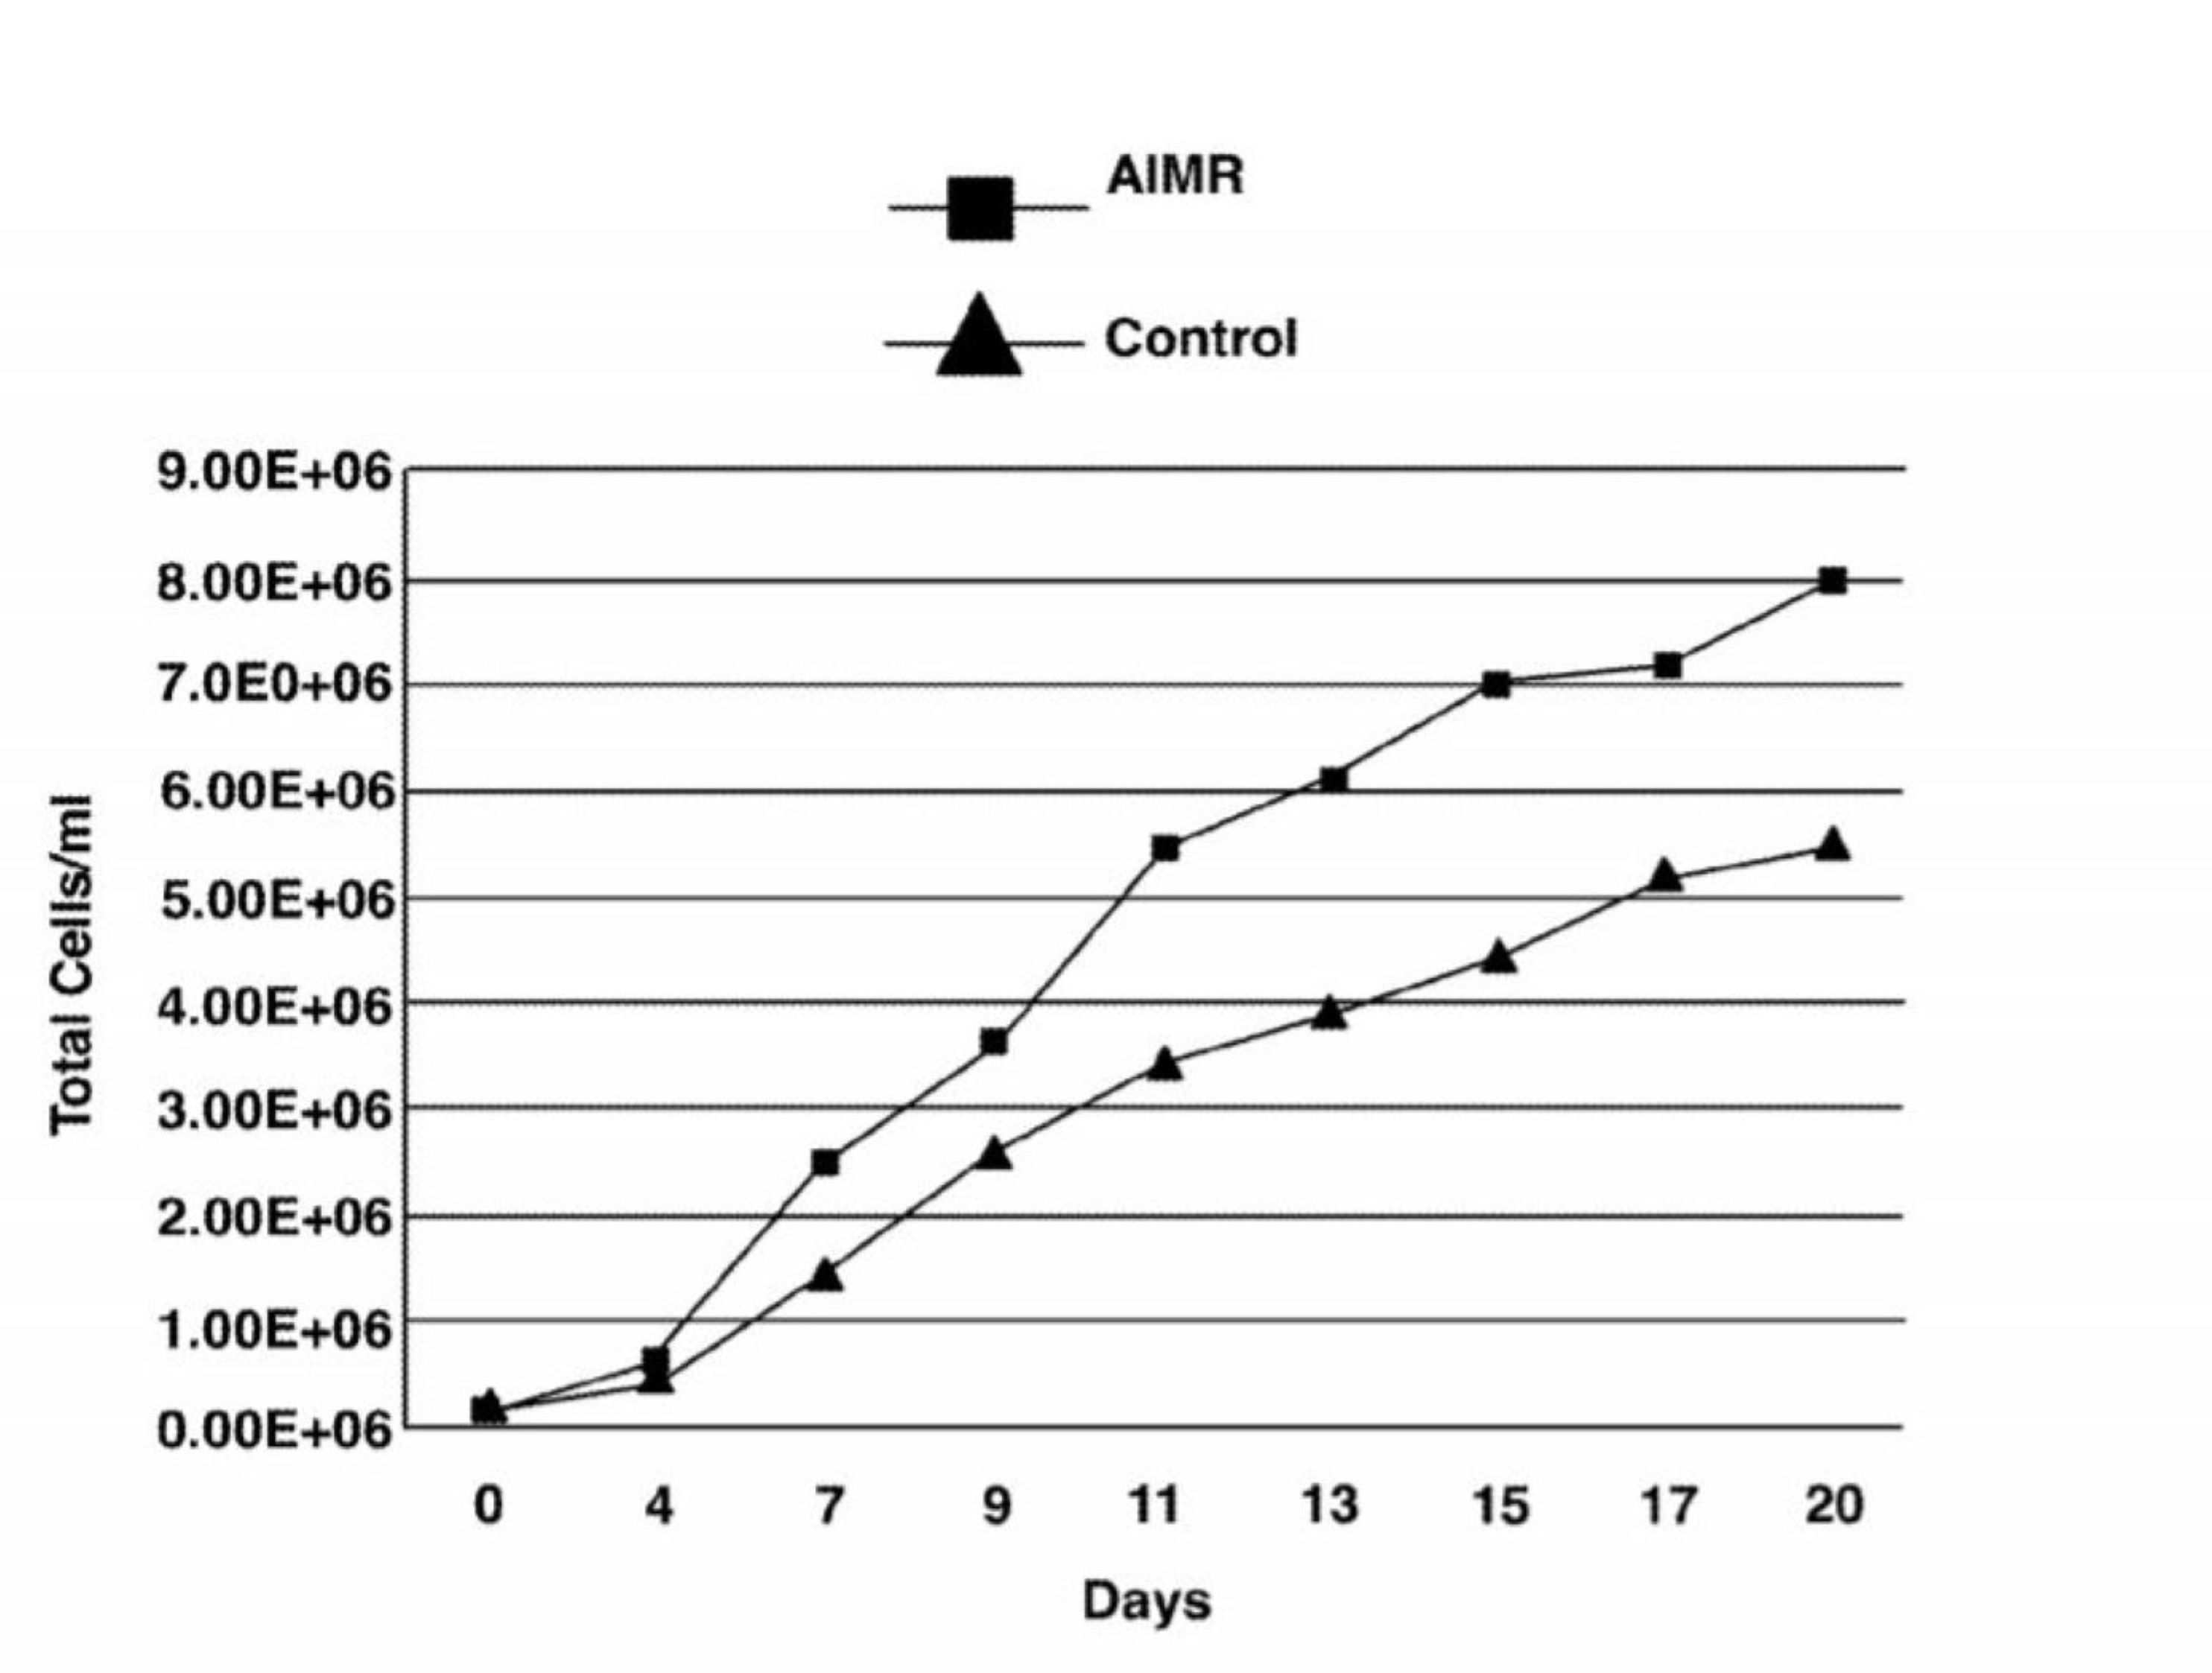 Shown is a cell growth and tissue assembly curve for human bronchial tracheal cells (HBTC) with and without exposure to AIMR over a twenty-day growth period.